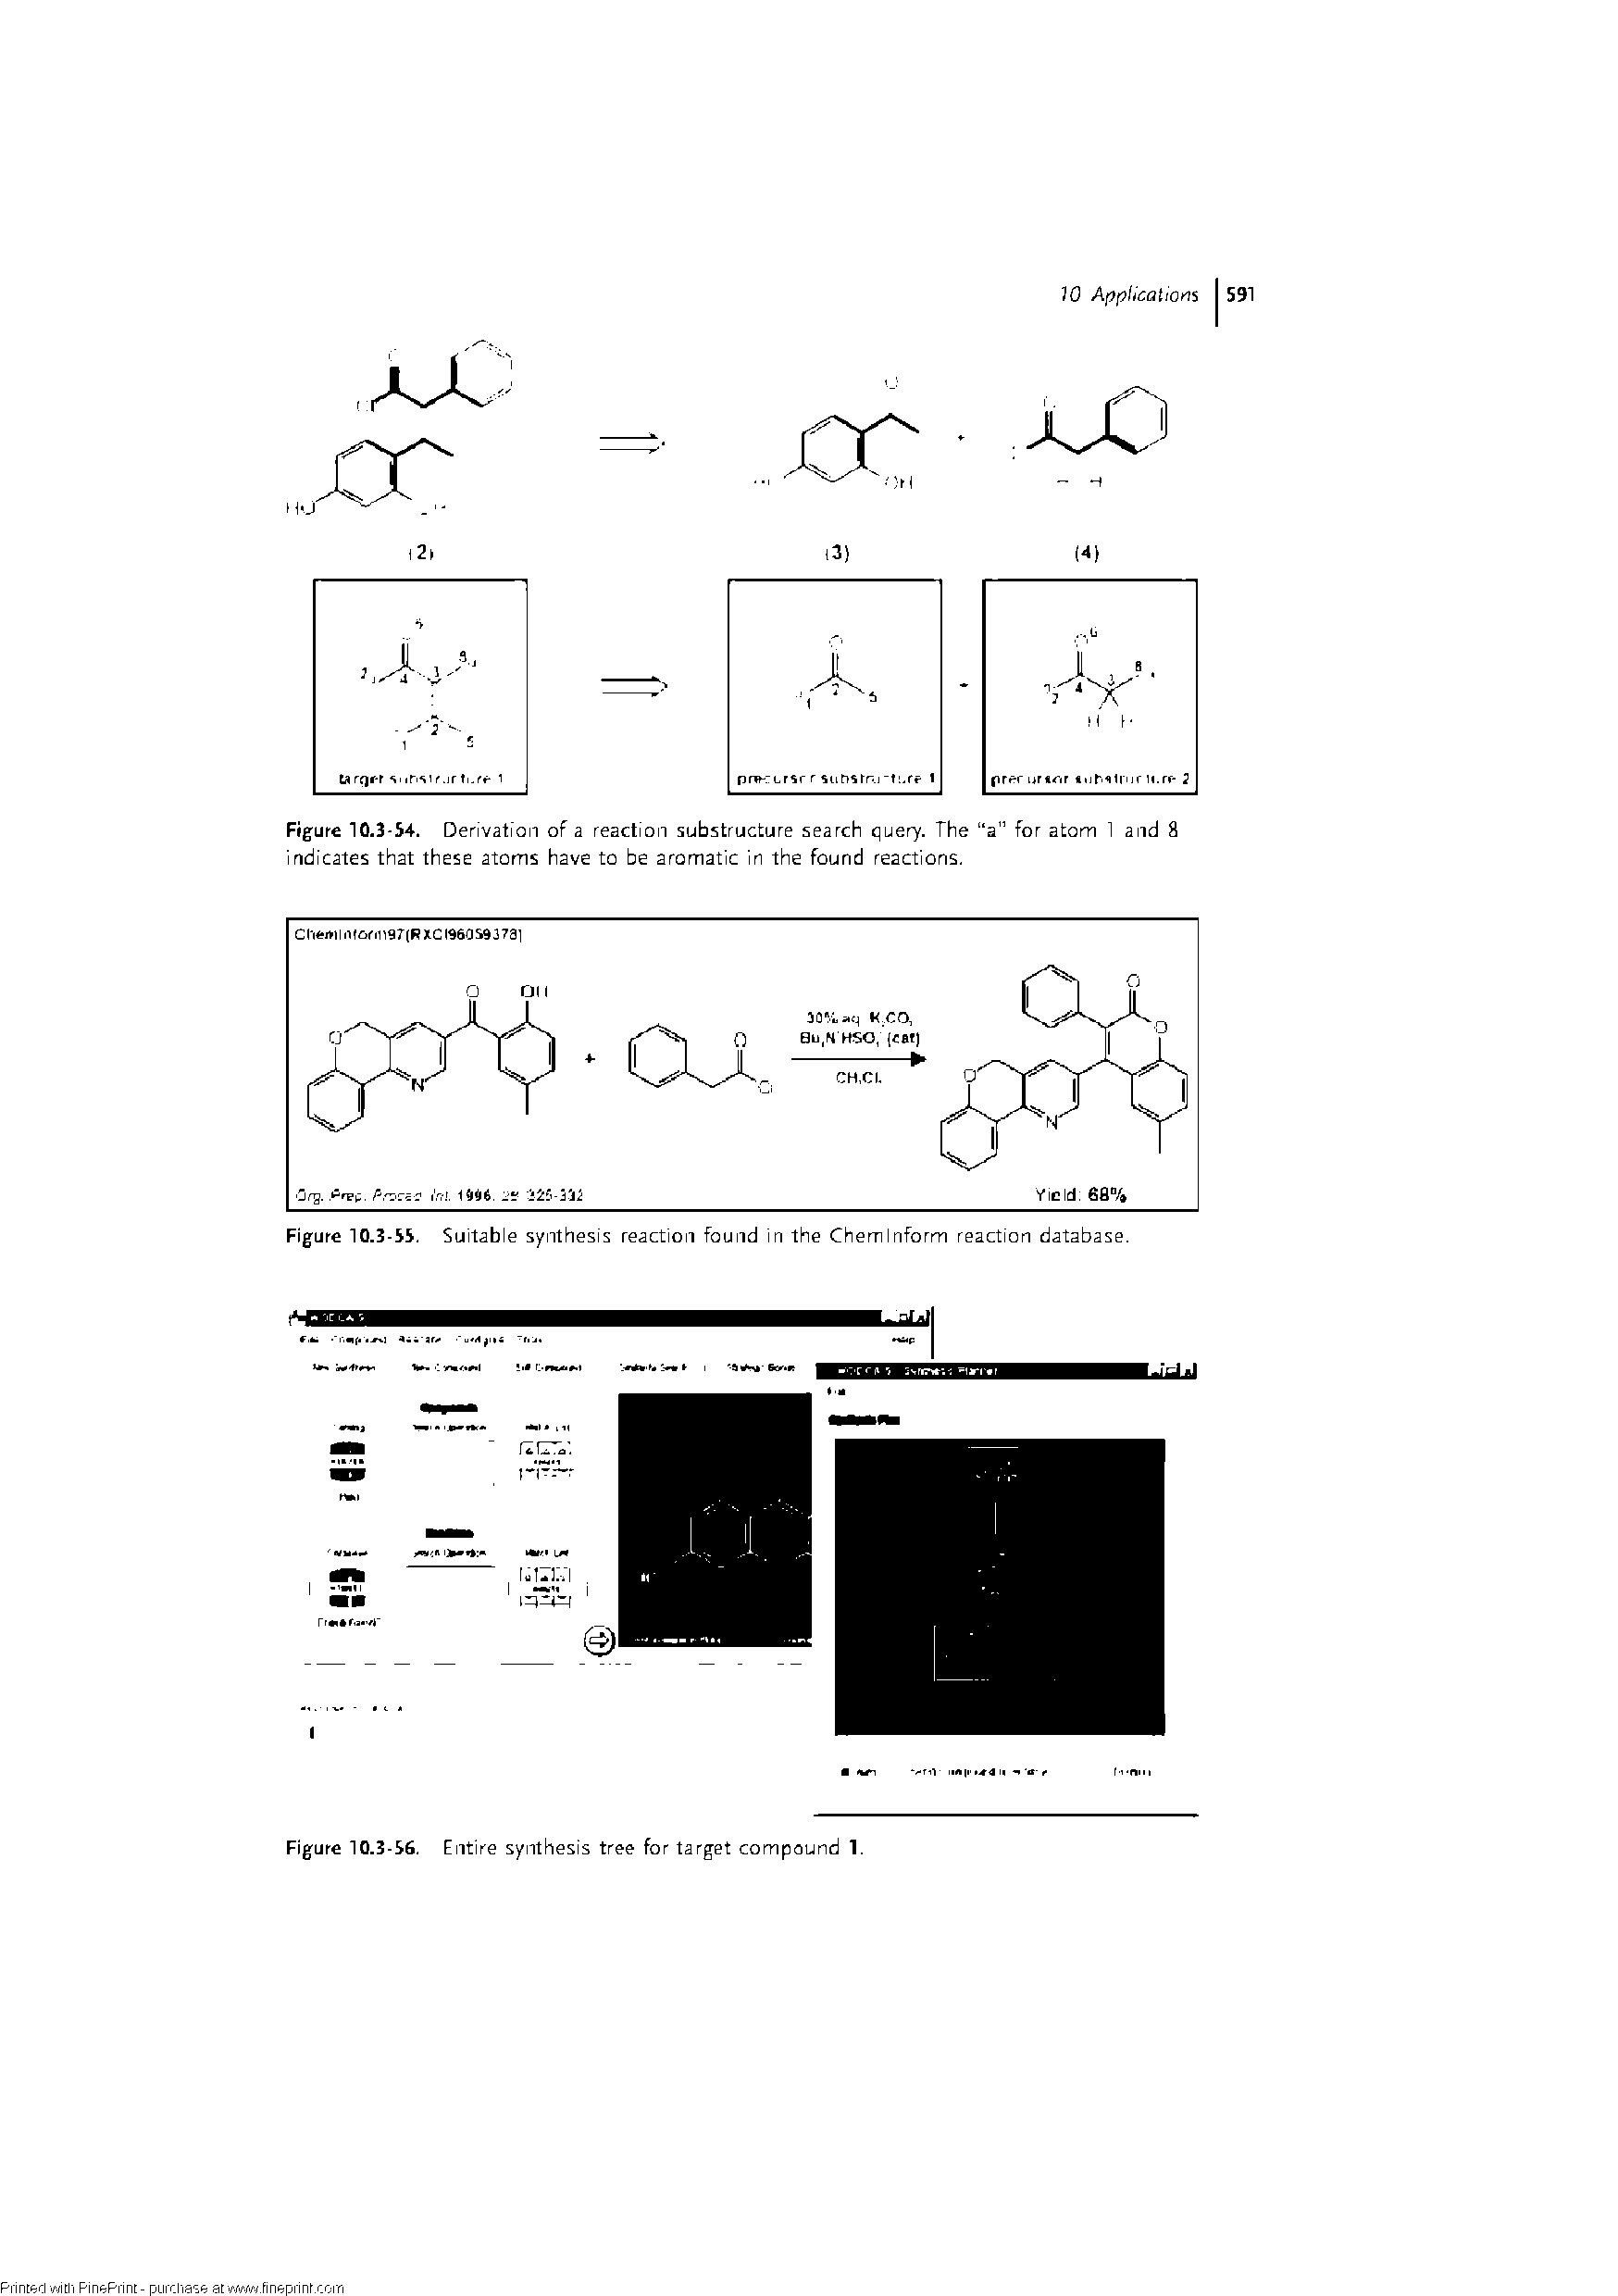 Figure 10.3-55. Suitable synthesis reaction found in the Cheminform reaction database.